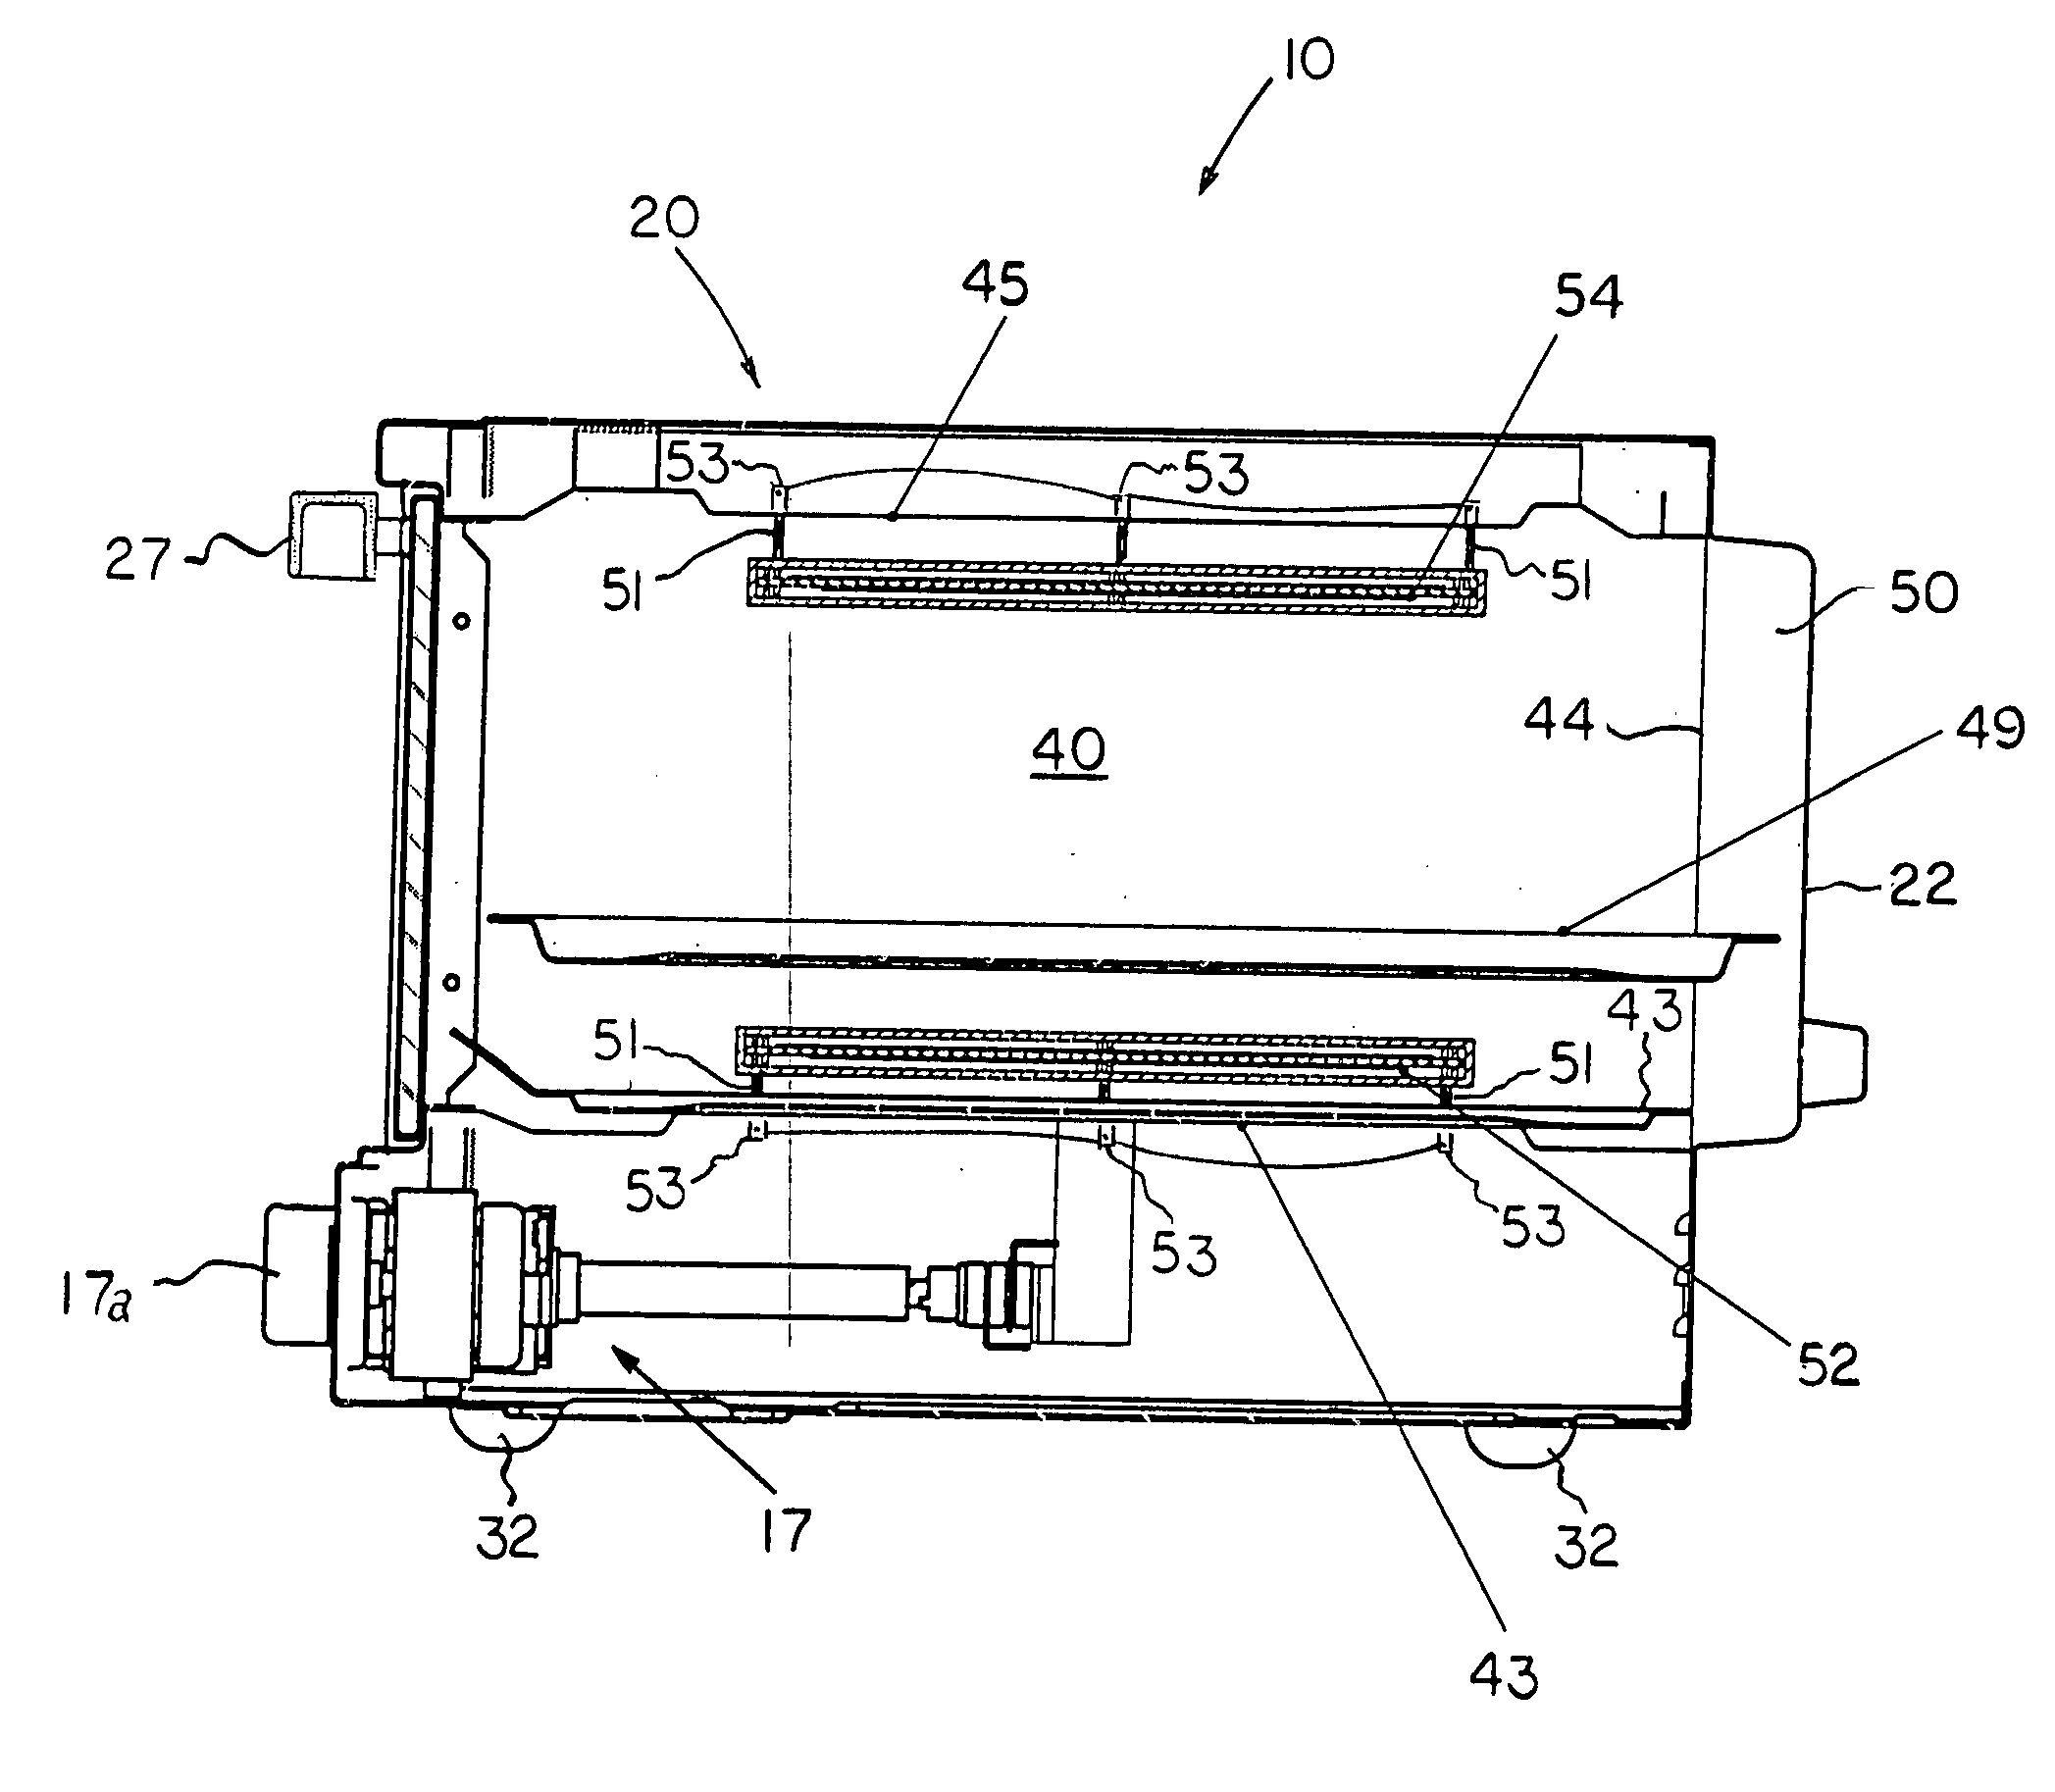 Toaster oven with low-profile heating elements